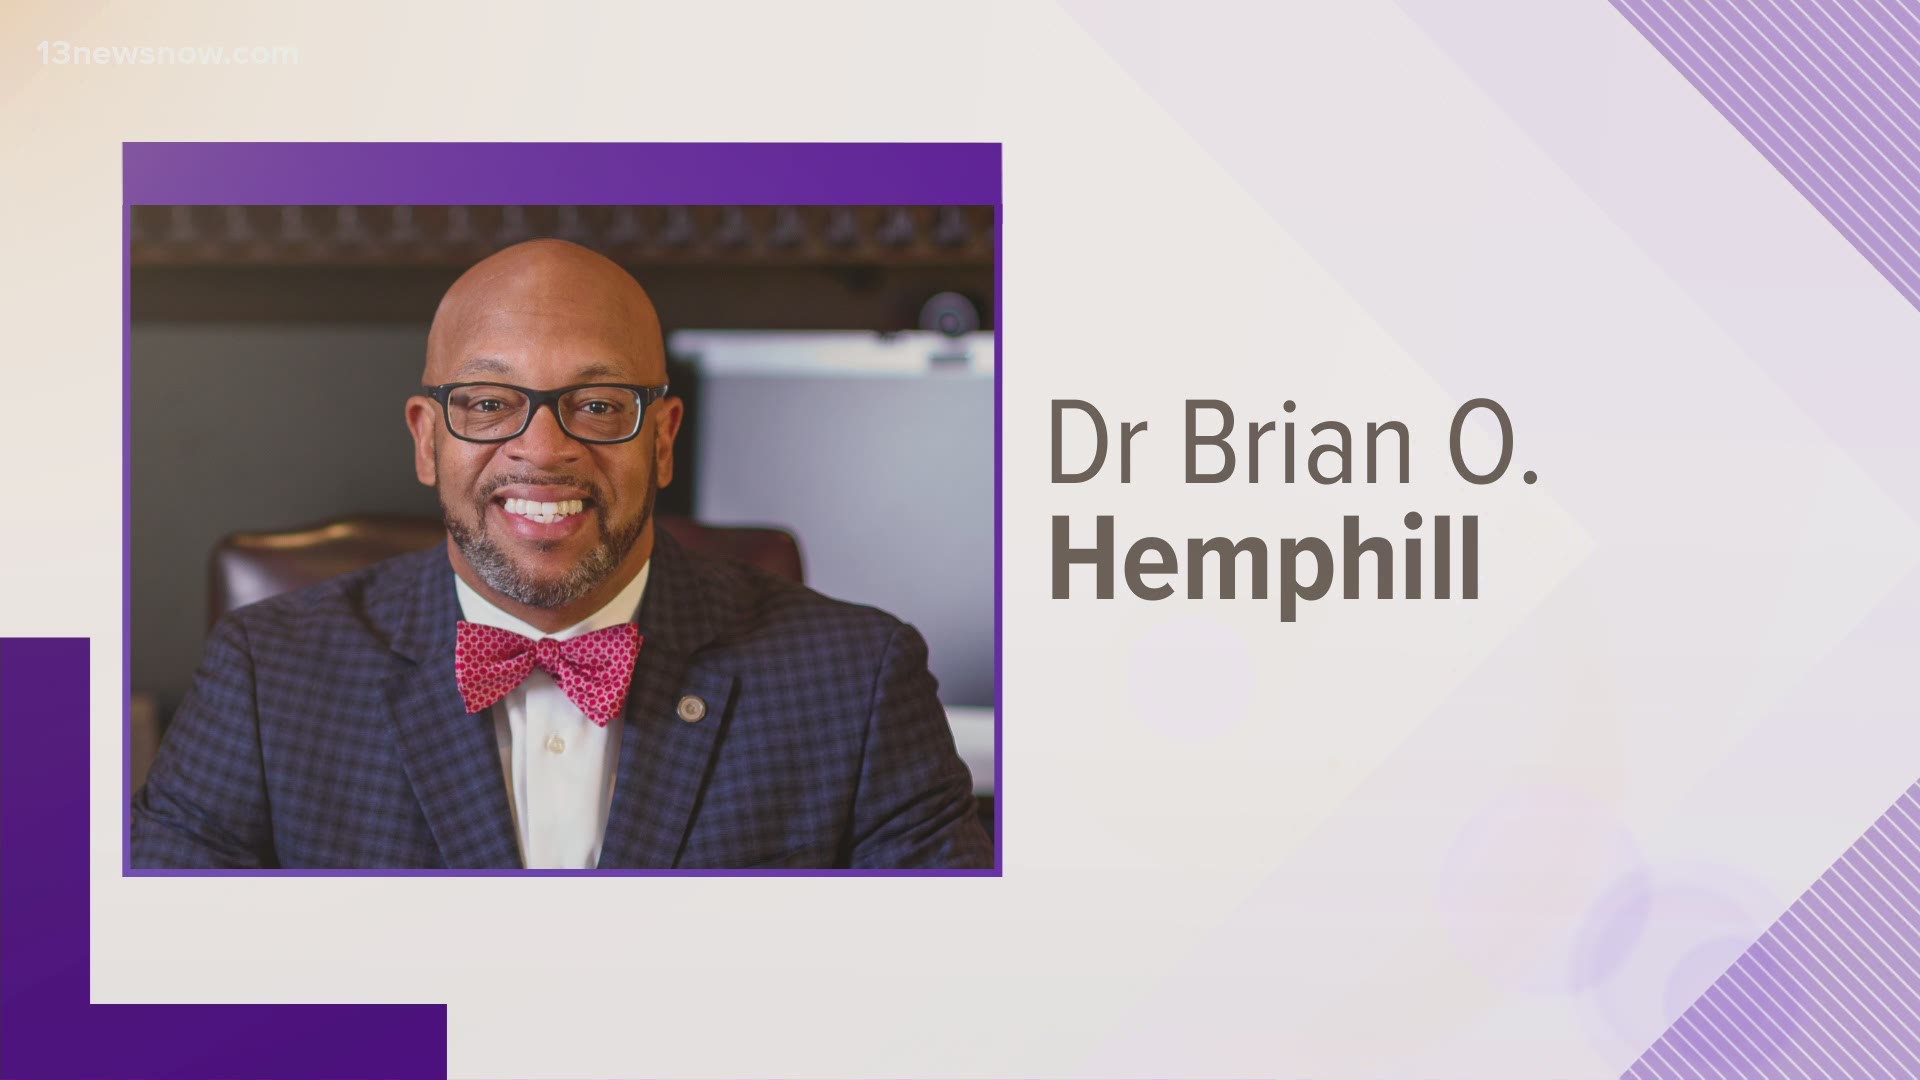 Dr. Brian Hemphill will serve as ODU's ninth president and the school's very first African-American president. He'll take over this summer.